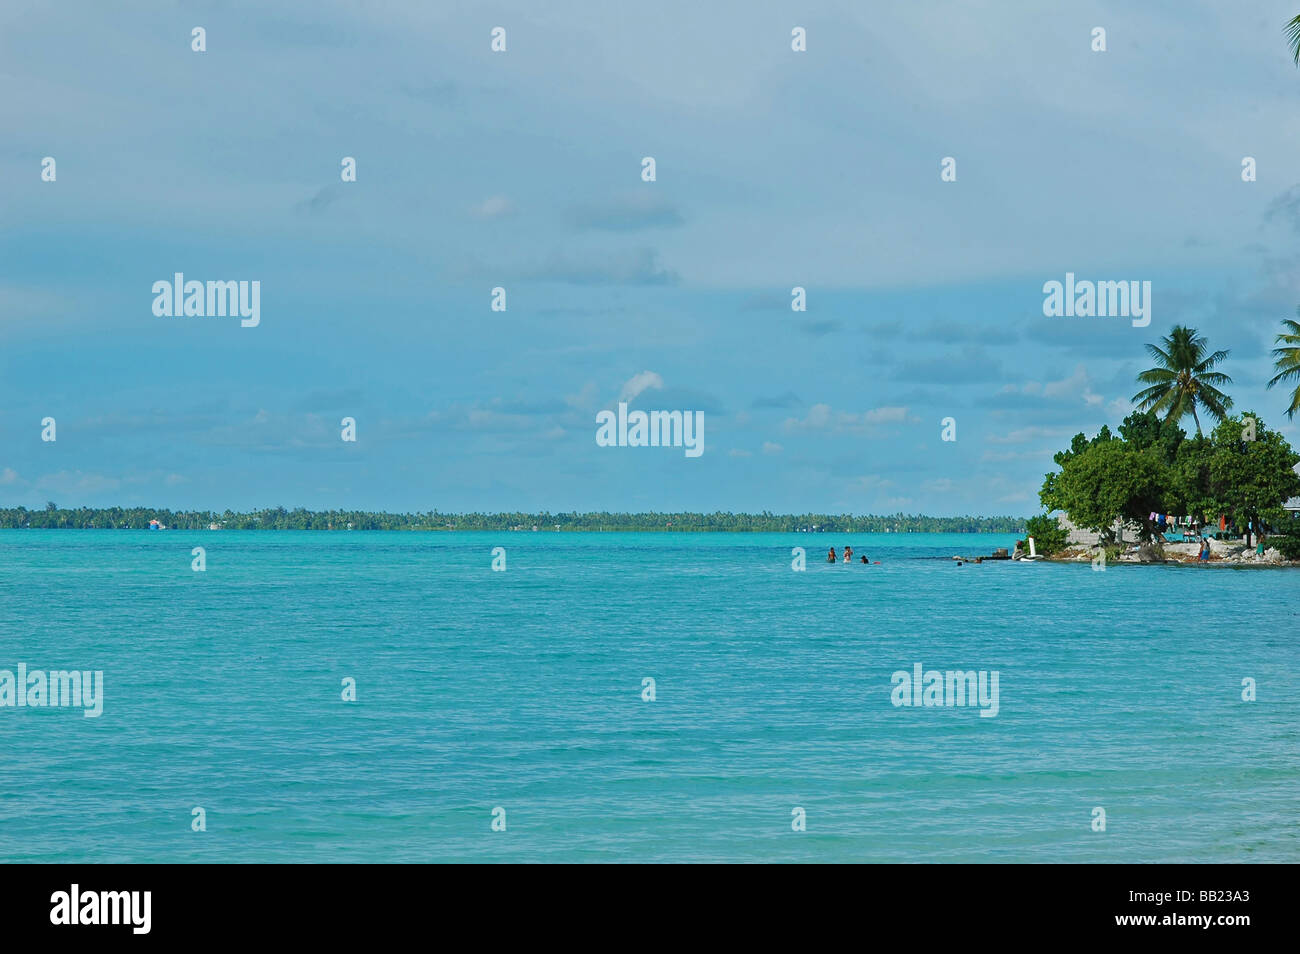 REPUBLIC OF KIRIBATI, South Tarawa. Small island in a blue turquoise sea, with houses and laundry drying under coconut trees Stock Photo